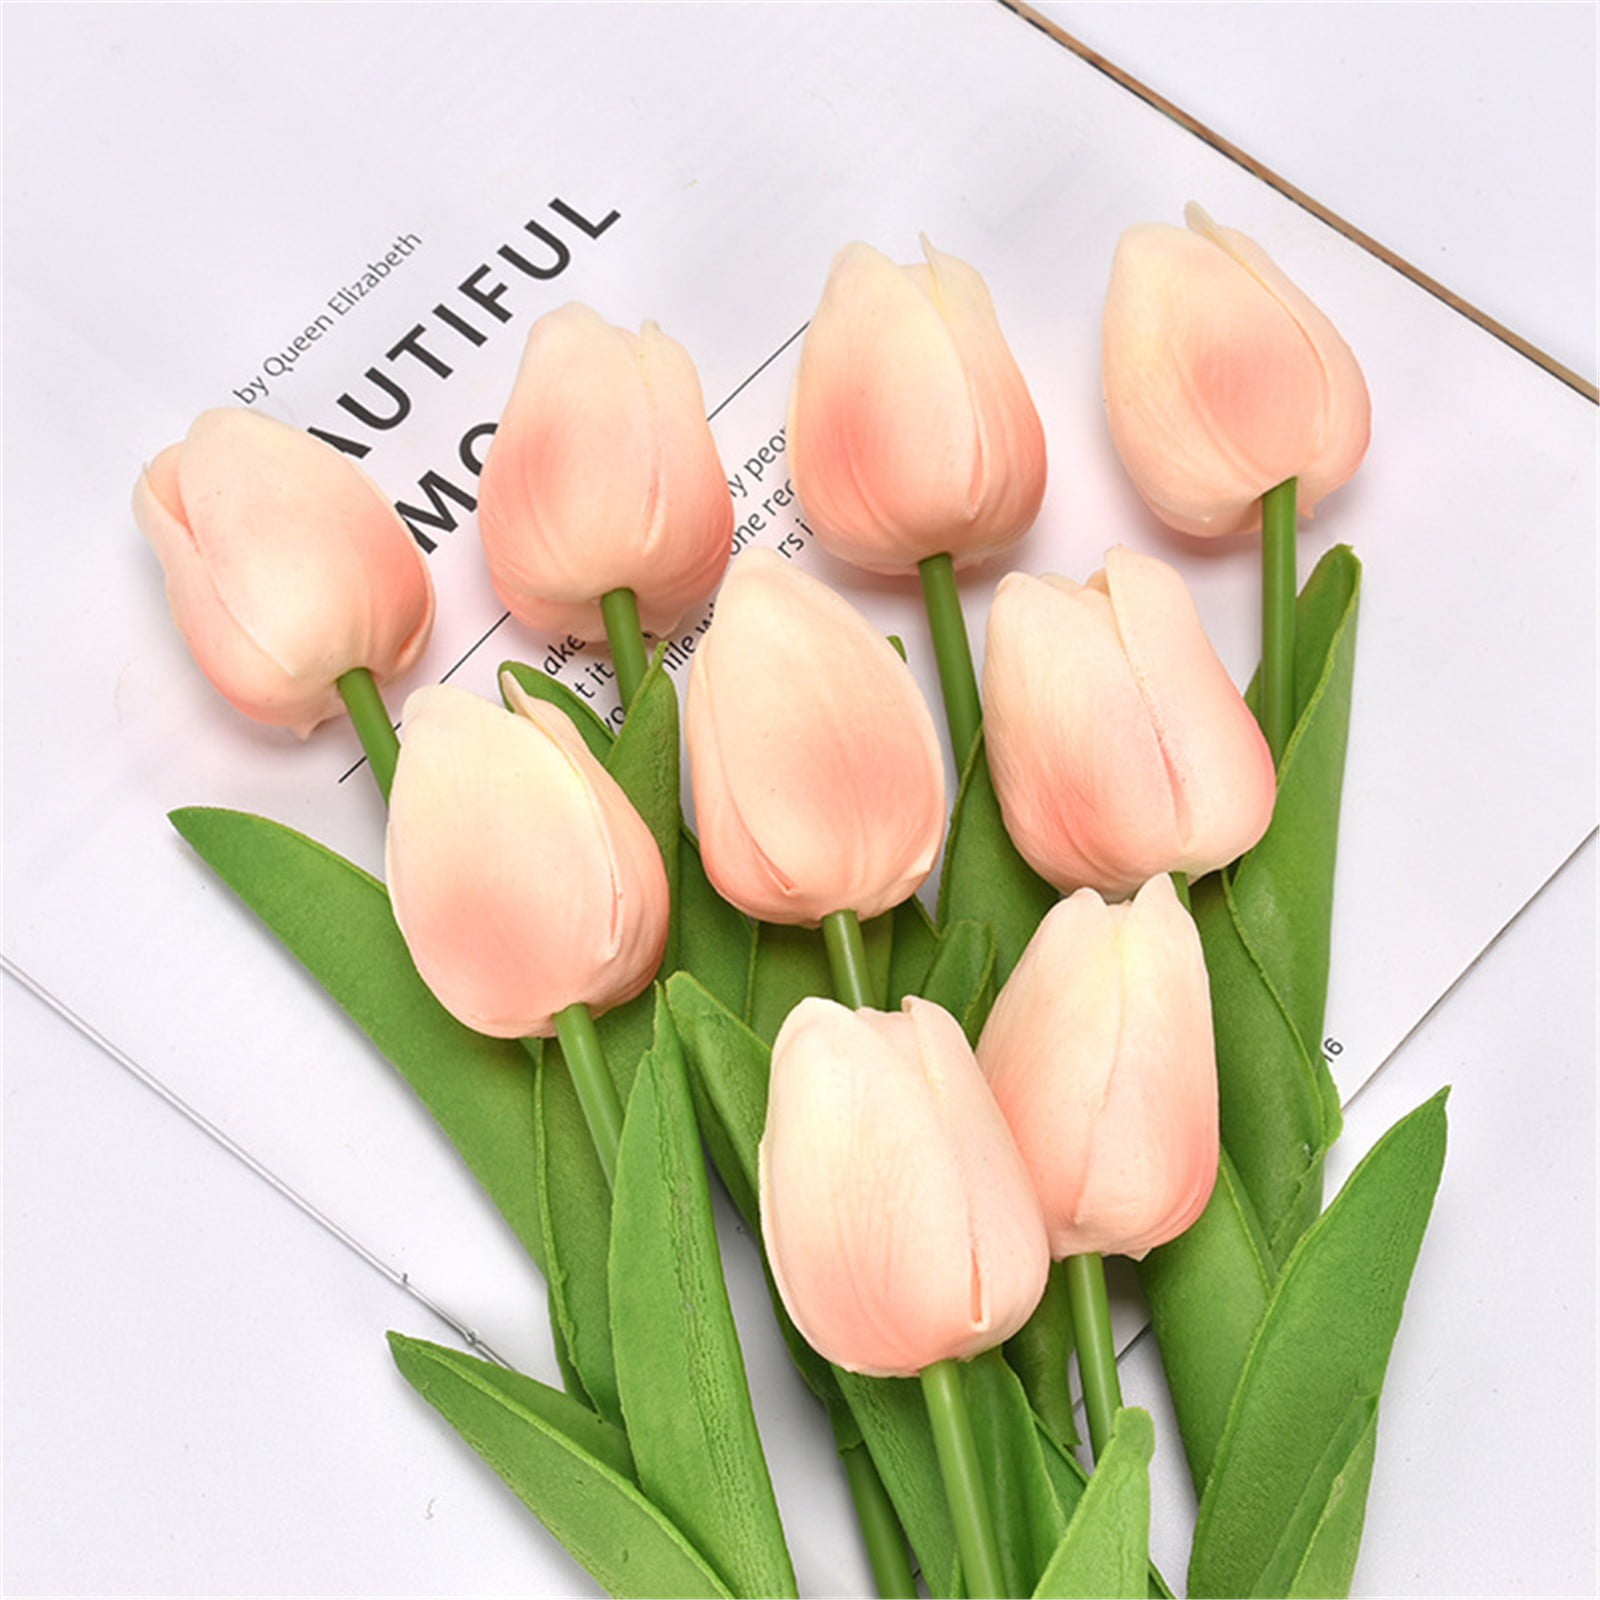 32cm Artifical Real Touch PU Tulips Flower Wedding Party Bridal Home Decor New